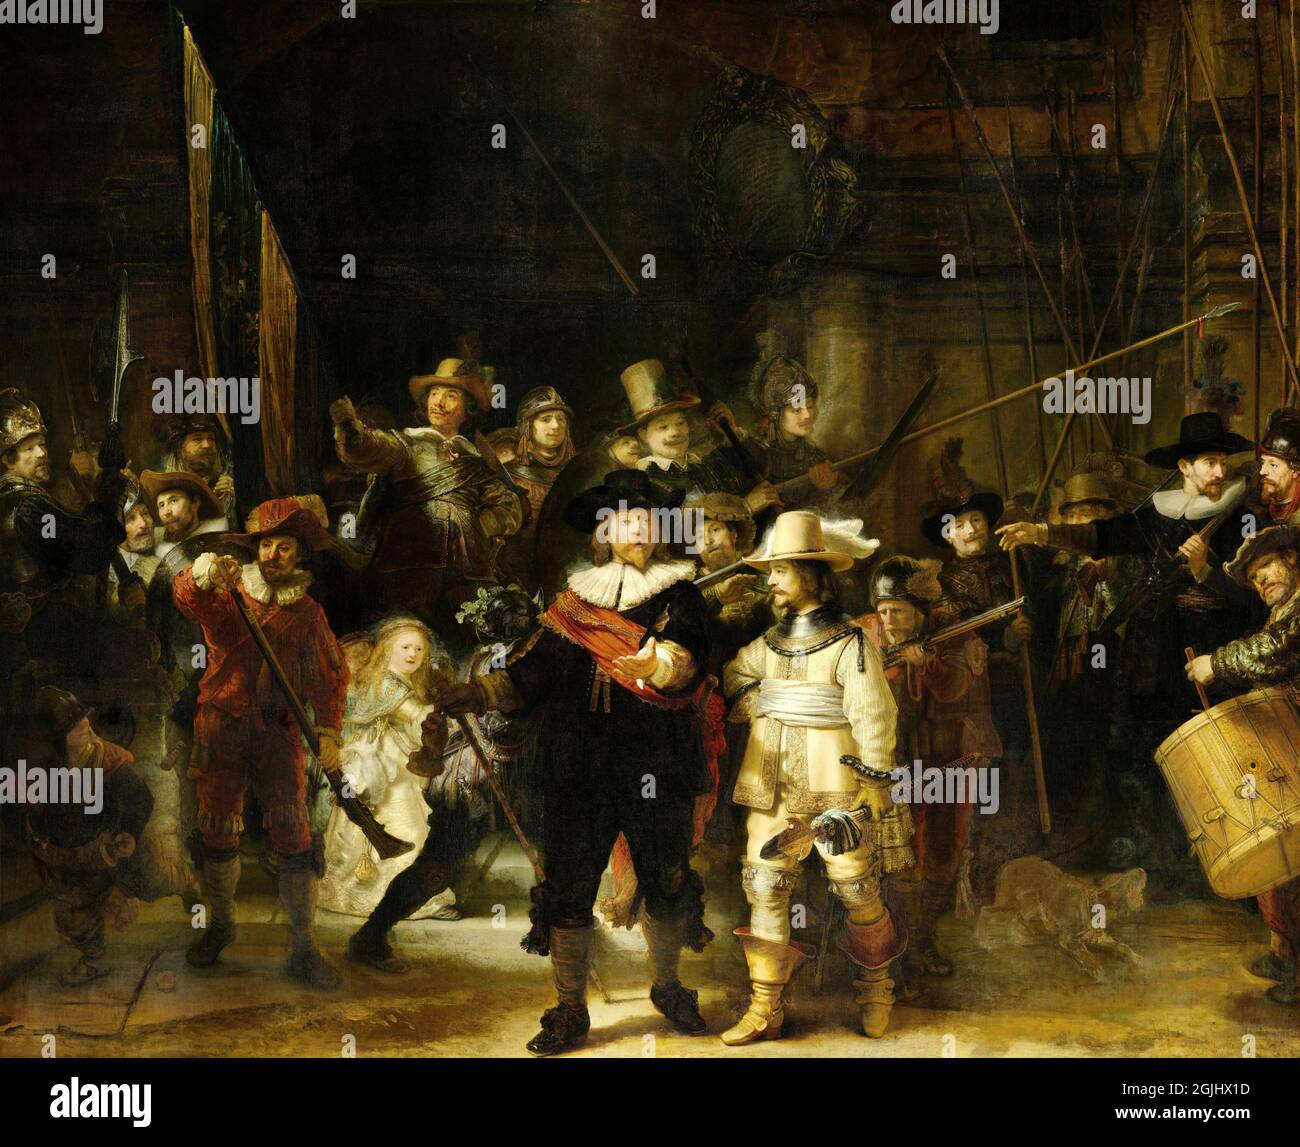 Classic artwork - The Nightwatch by Rembrandt - 1642 Stock Photo